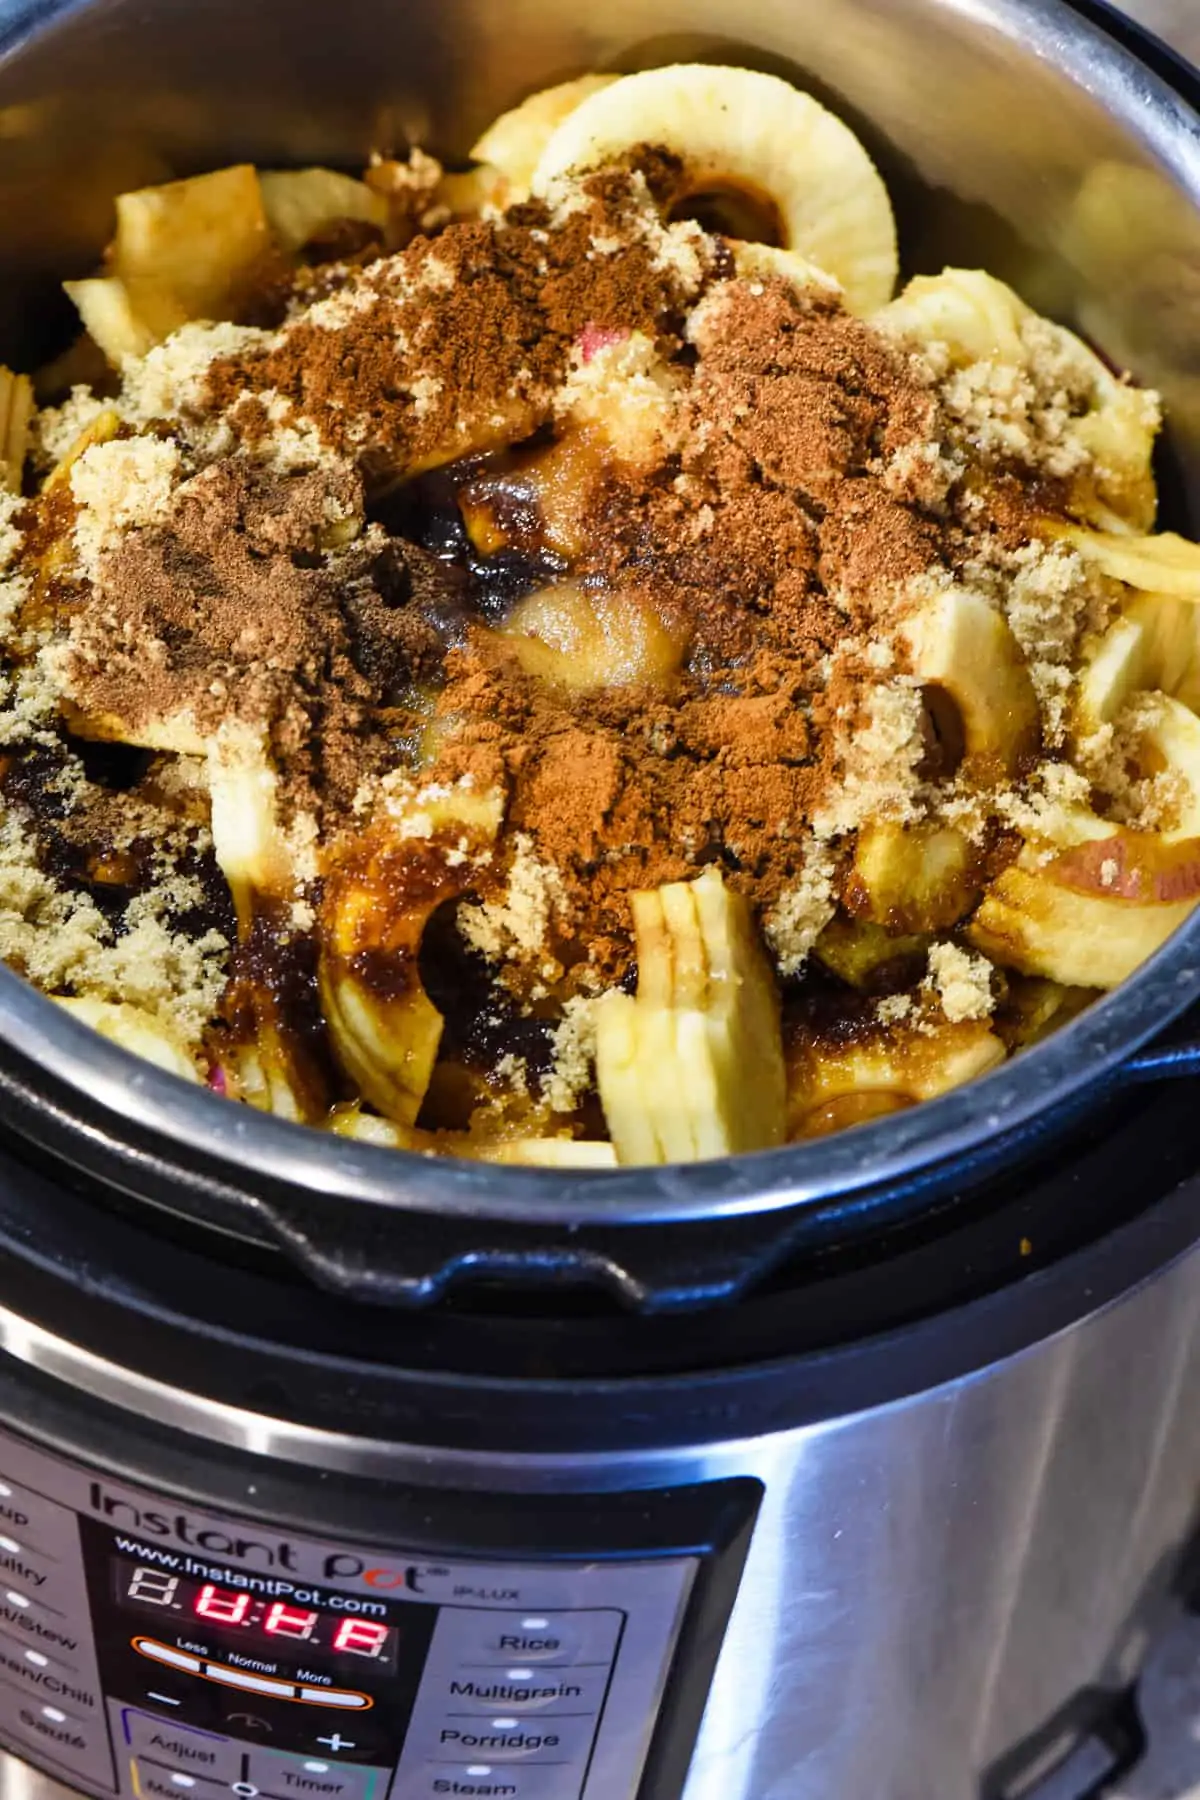 spices, sugar, apples, and ingredients for apple butter Instant Pot recipe